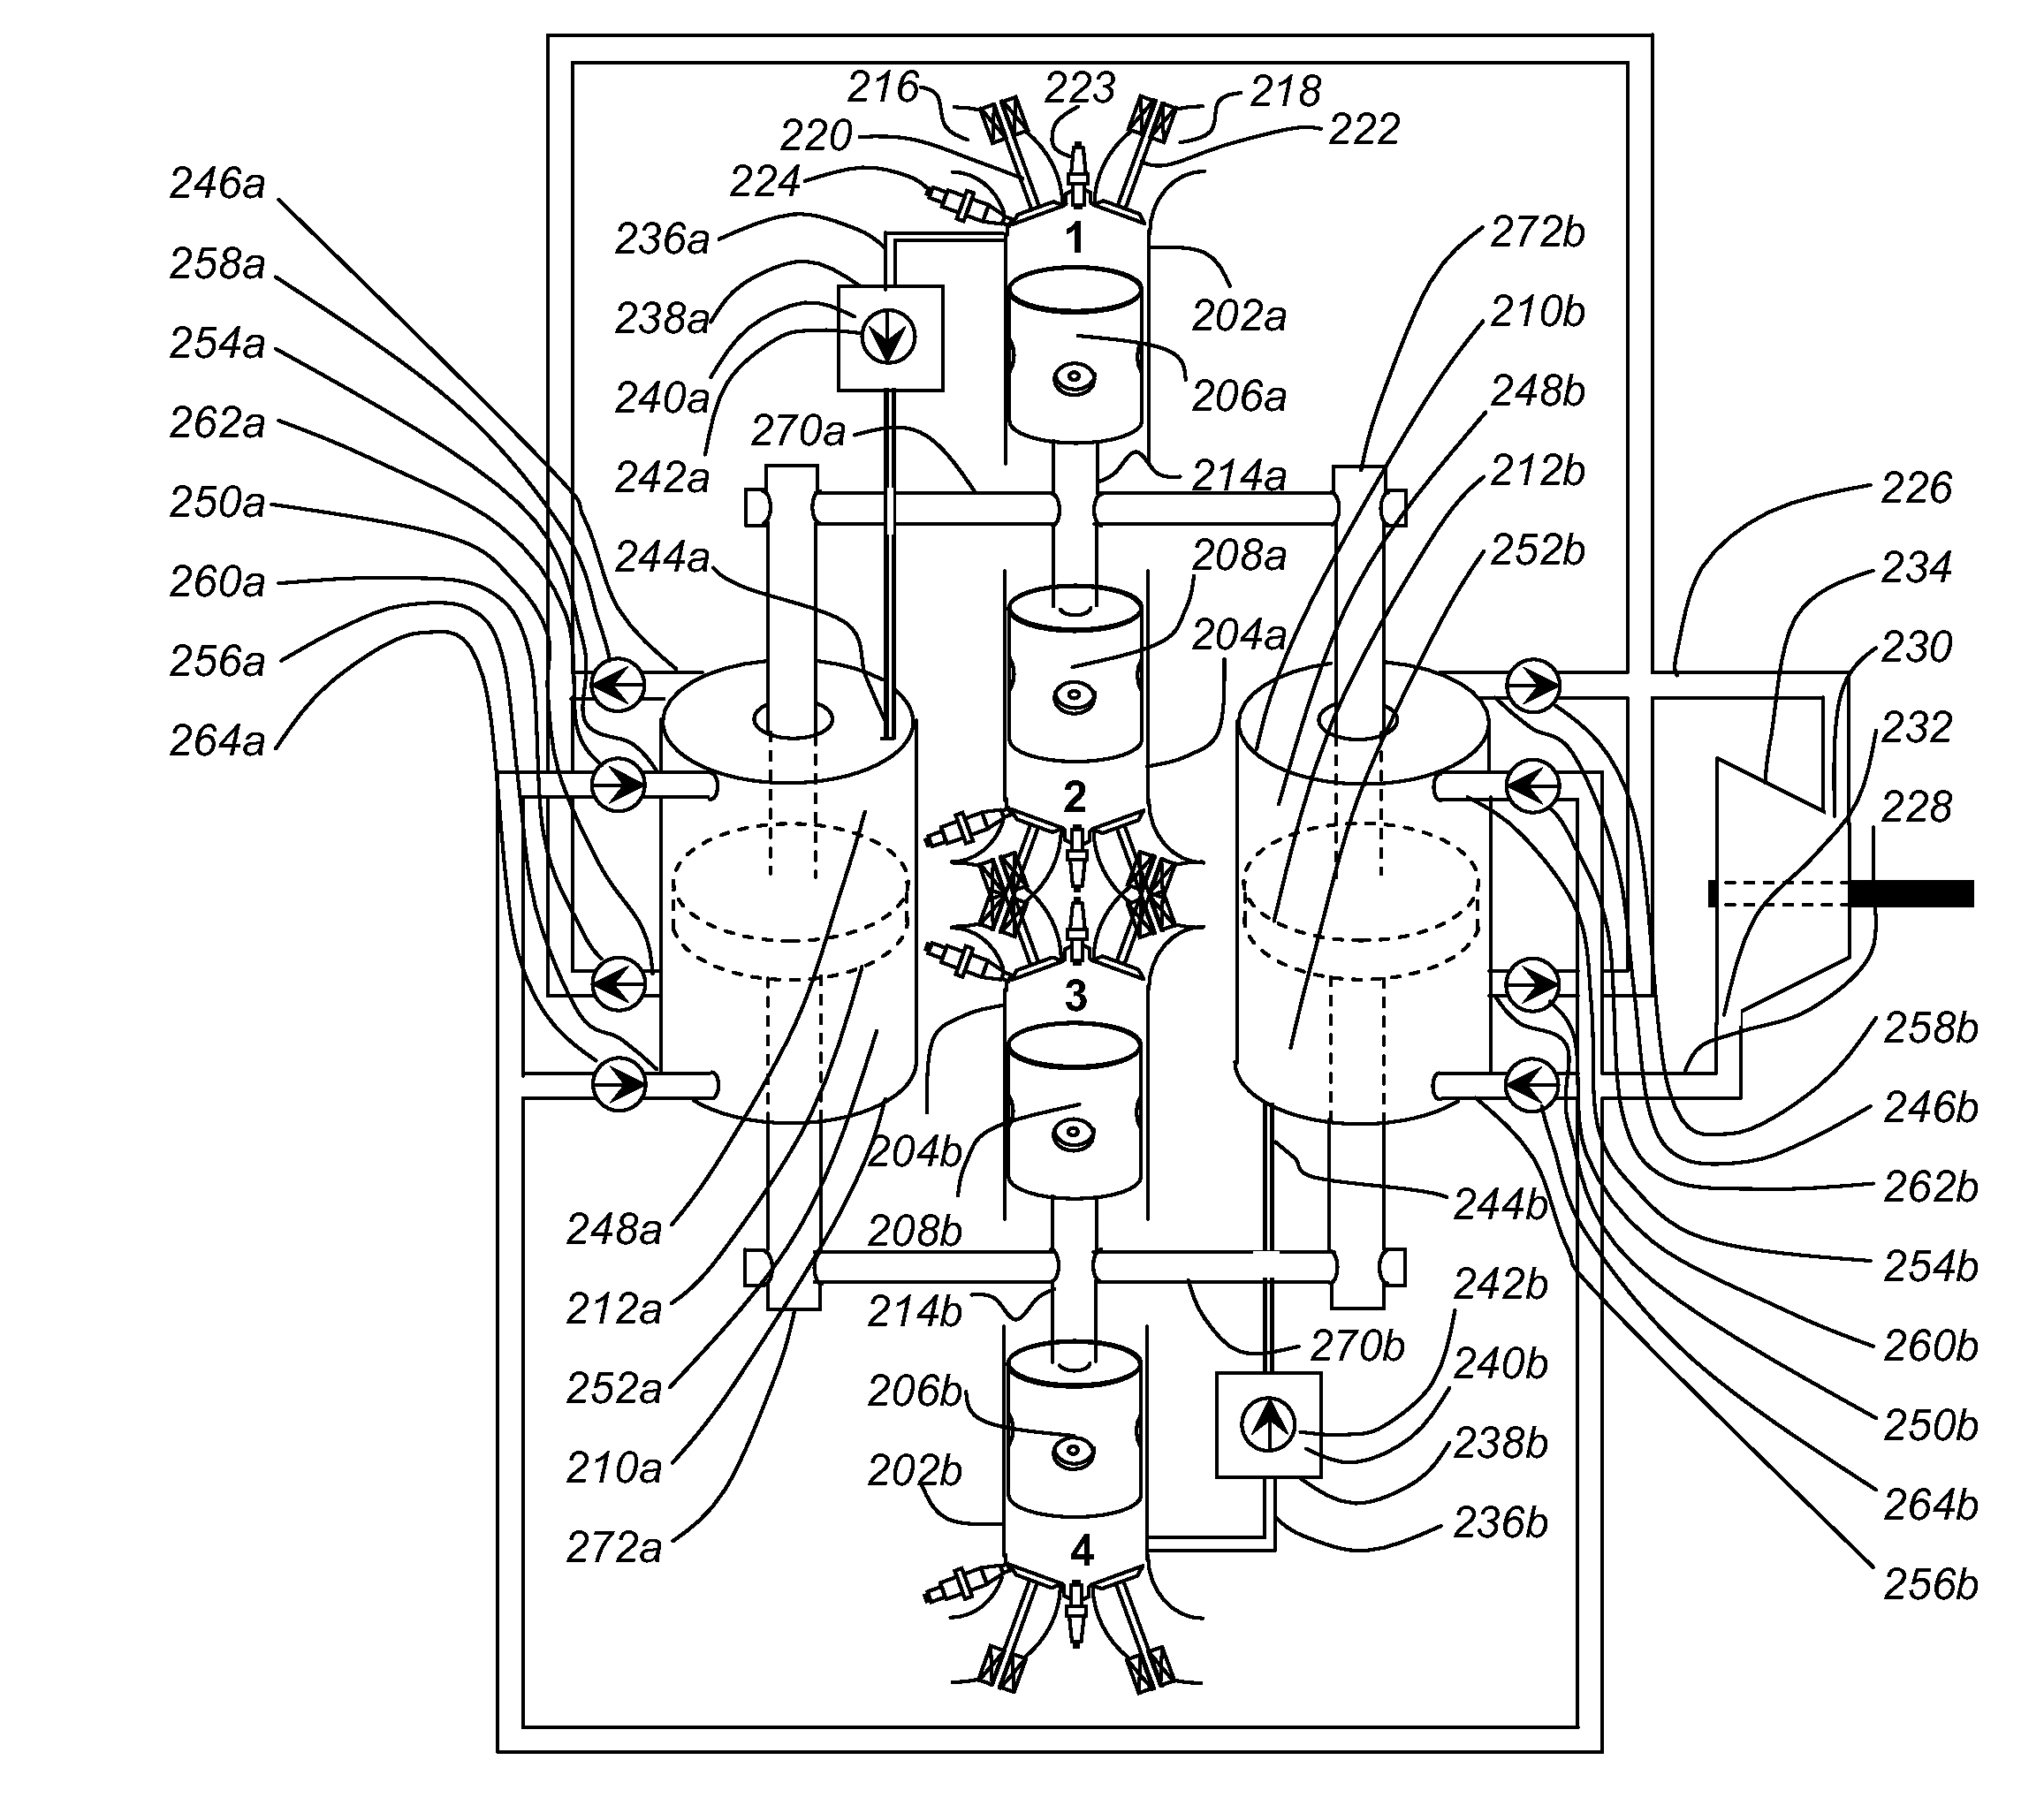 Internal combustion engine driven turbo-generator for hybrid vehicles and power generation